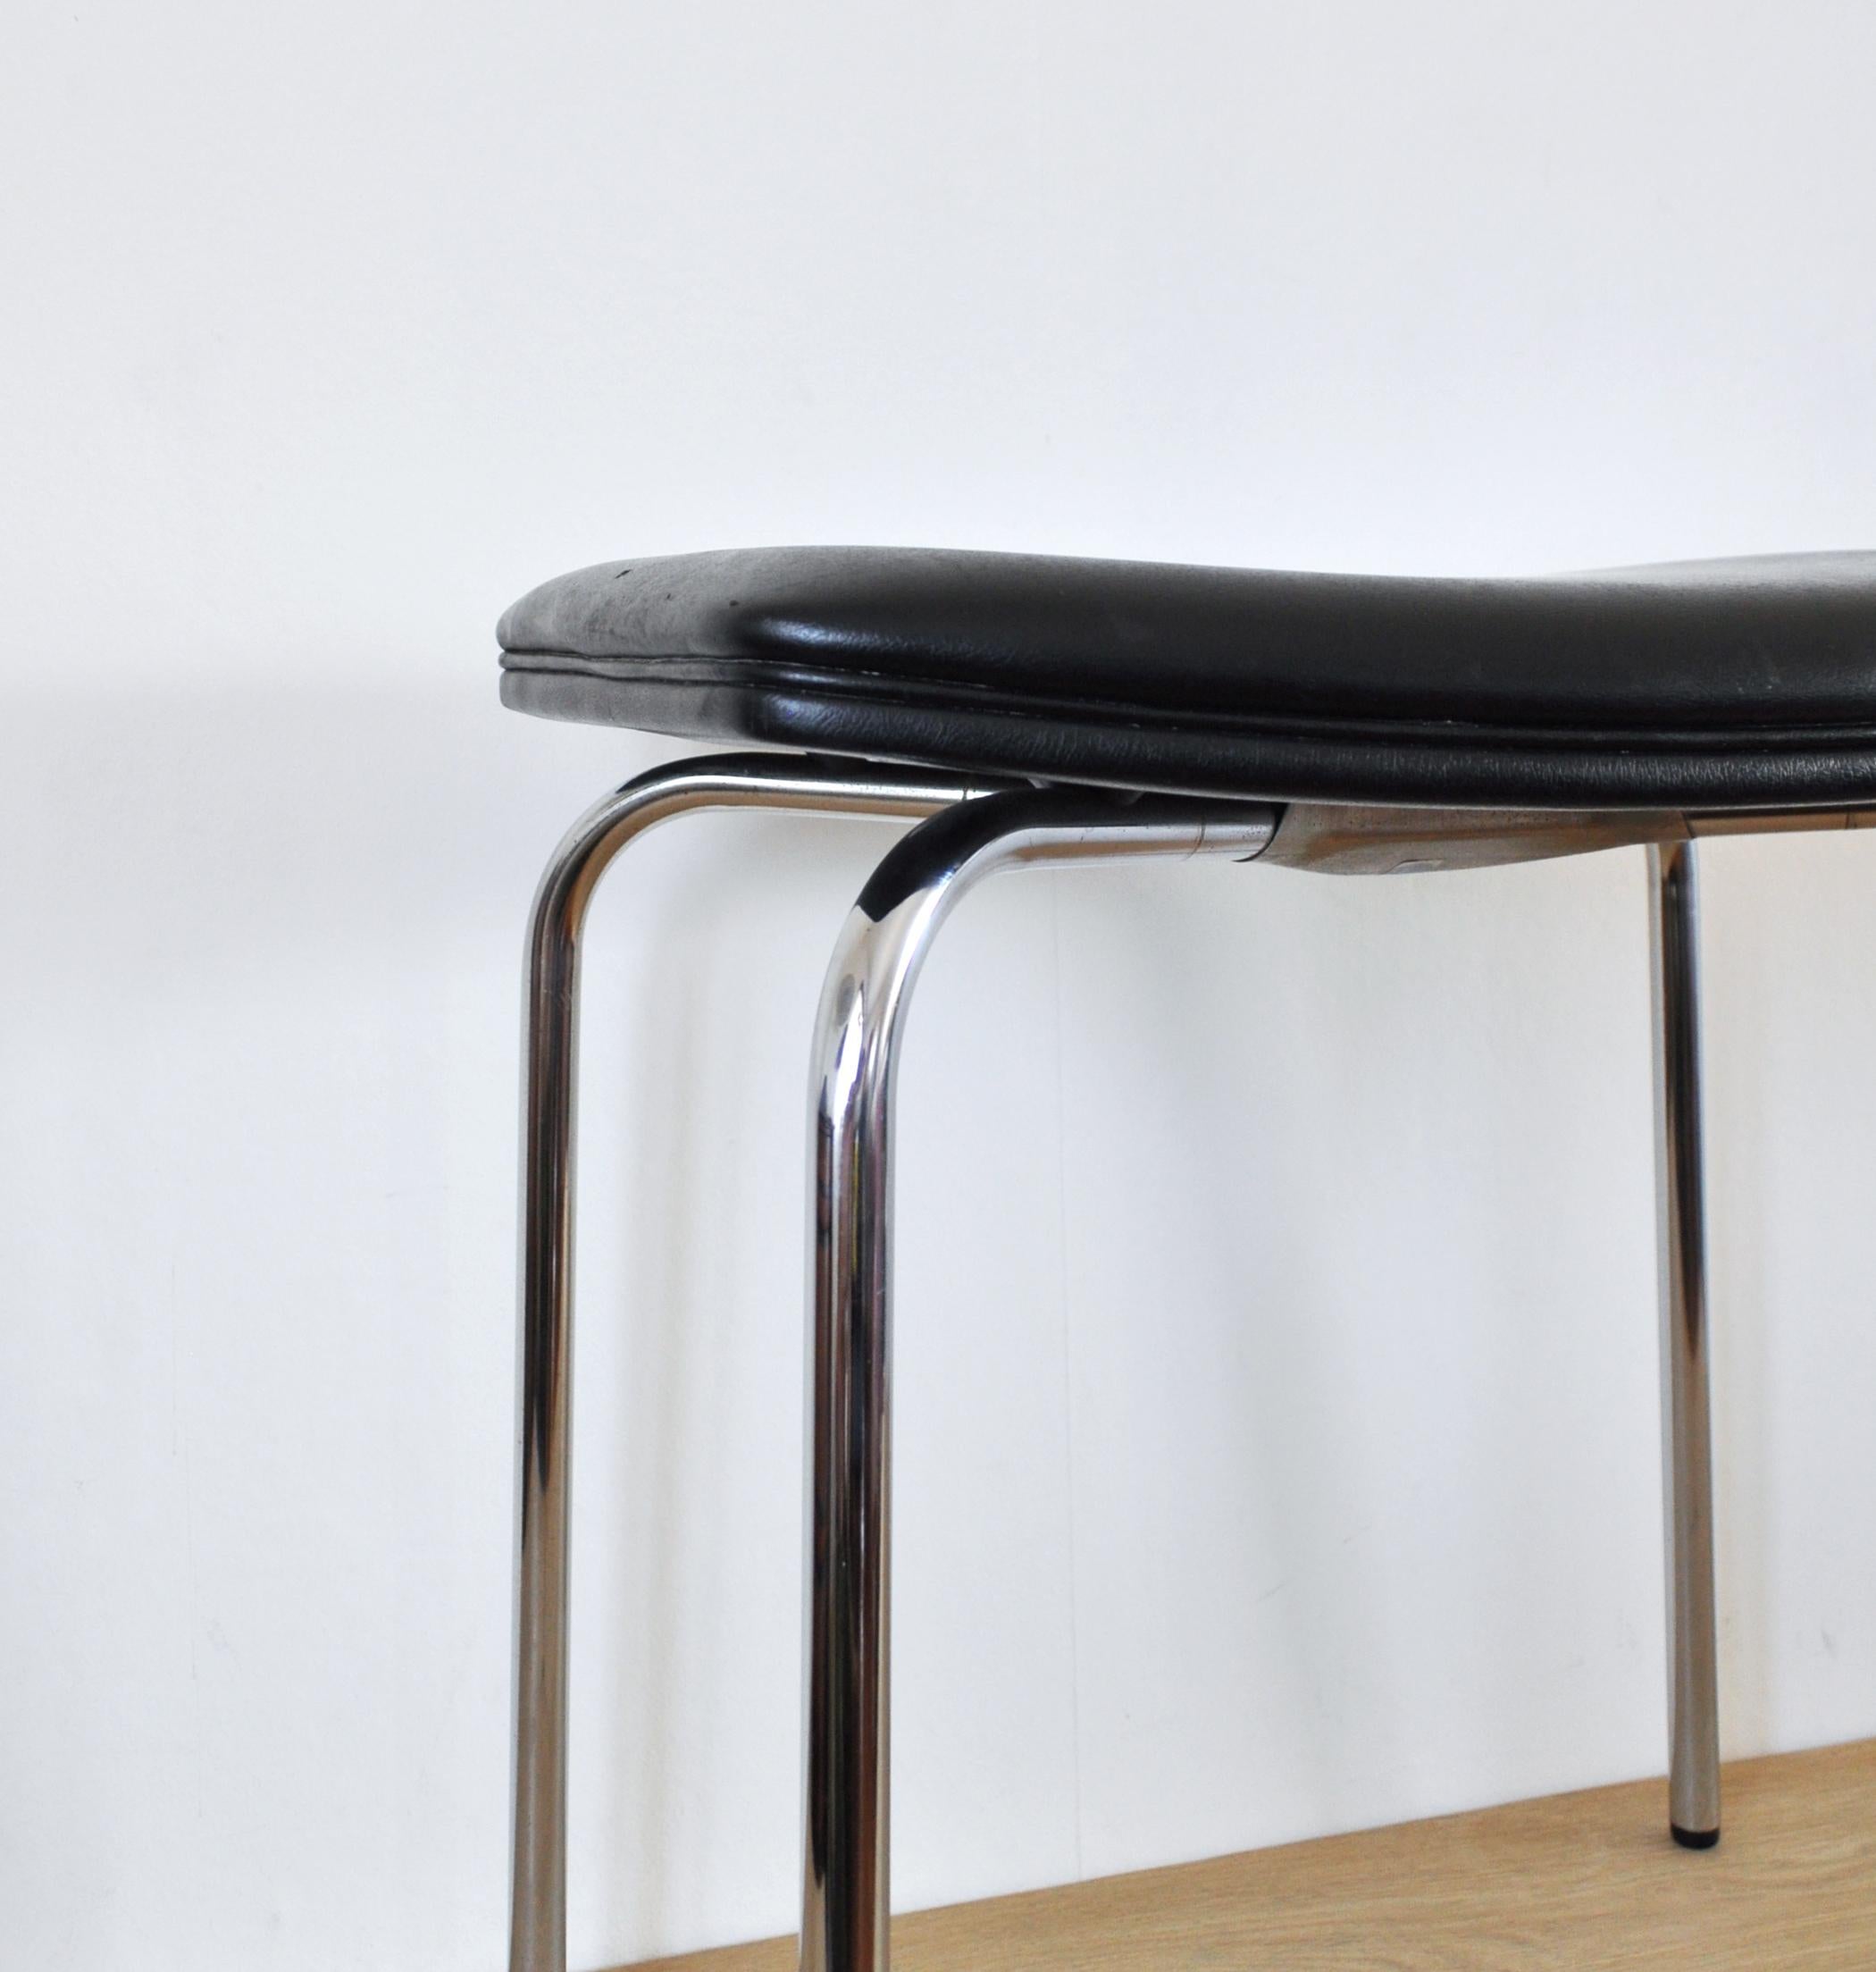 Danish Mid-Century Modern Stool by Duba In Good Condition For Sale In Vordingborg, DK